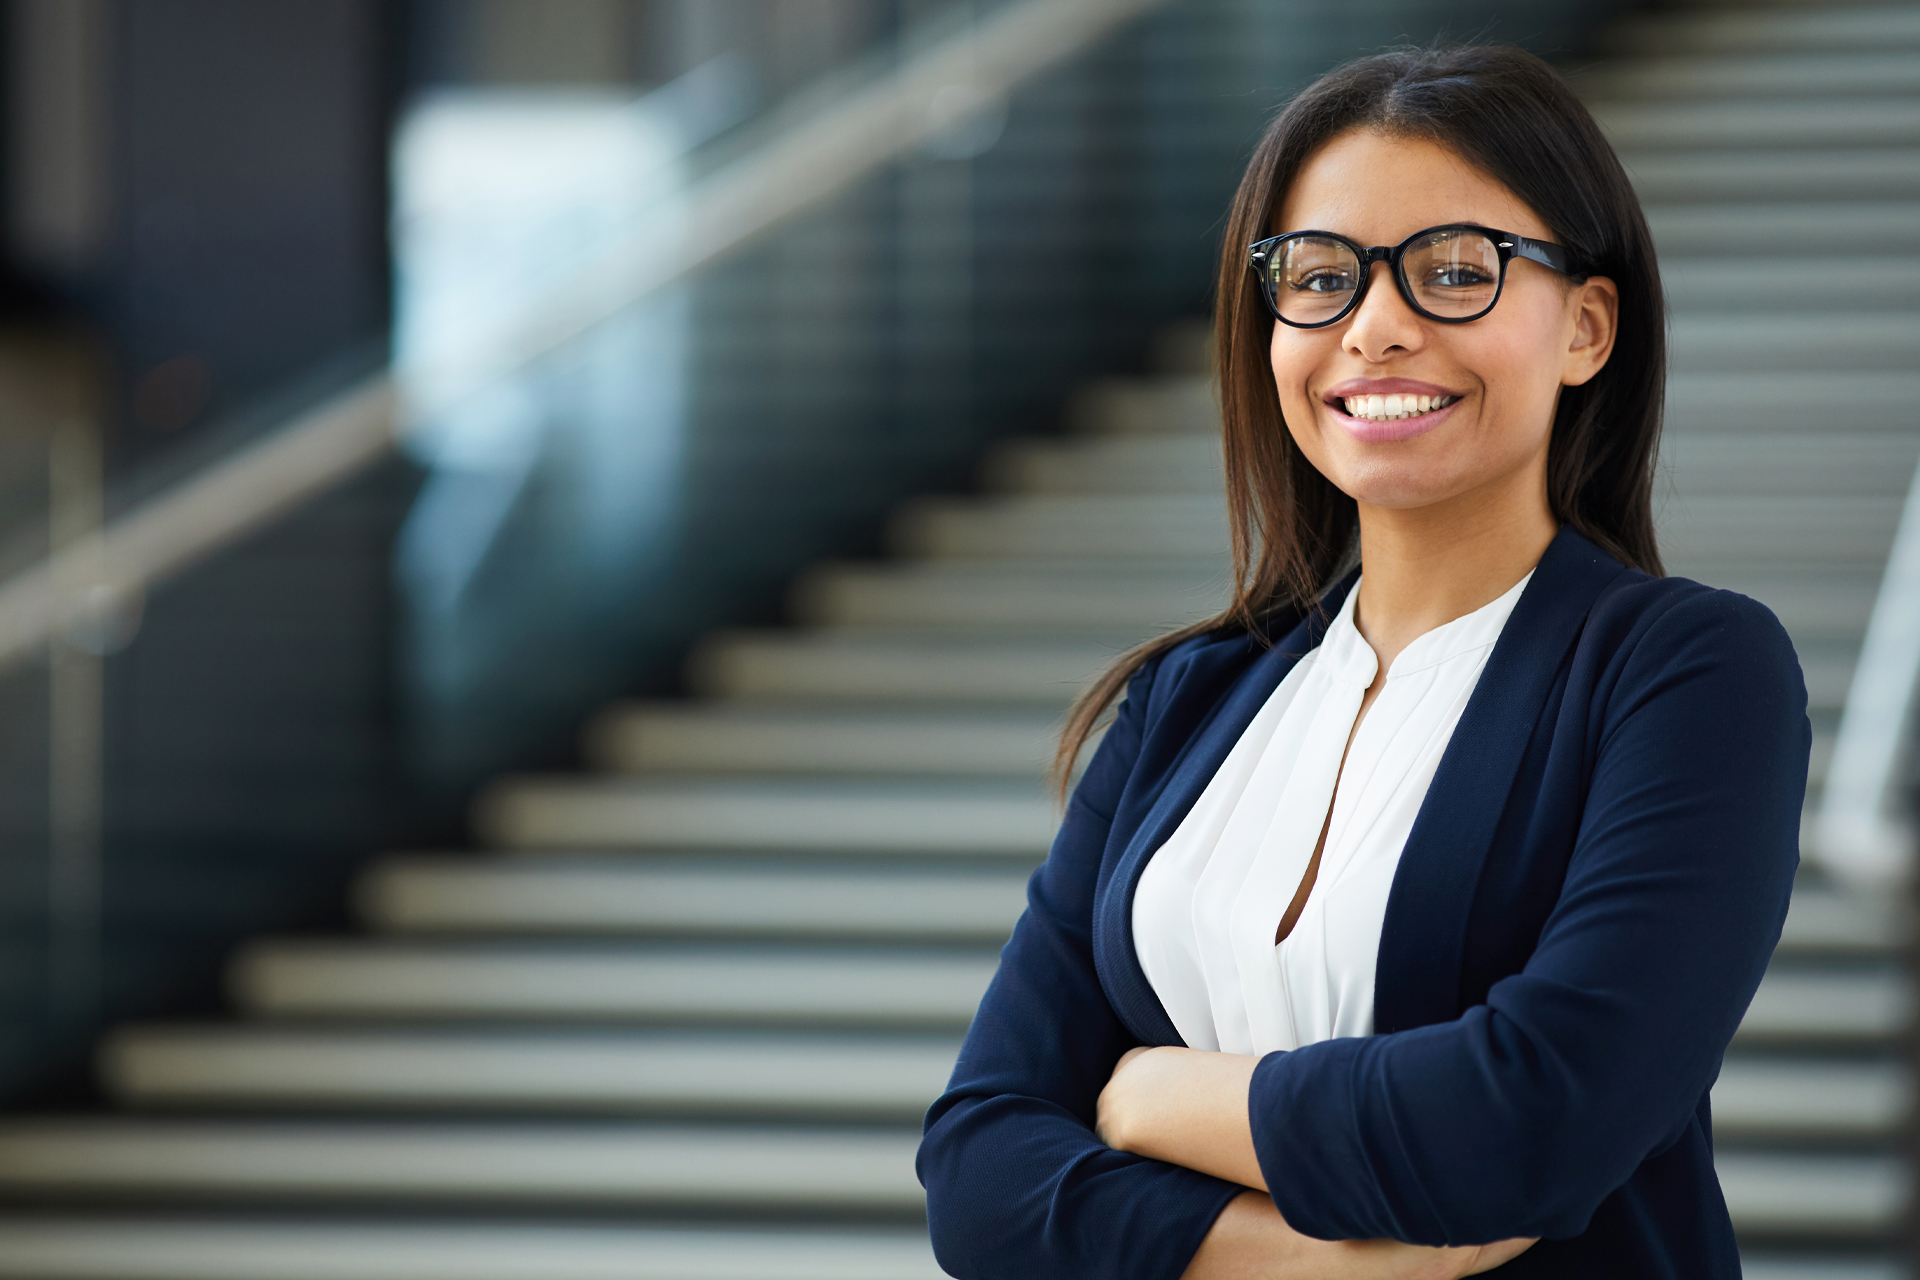 Diverse women entrepreneur standing in front of stairs and smiling at camera.